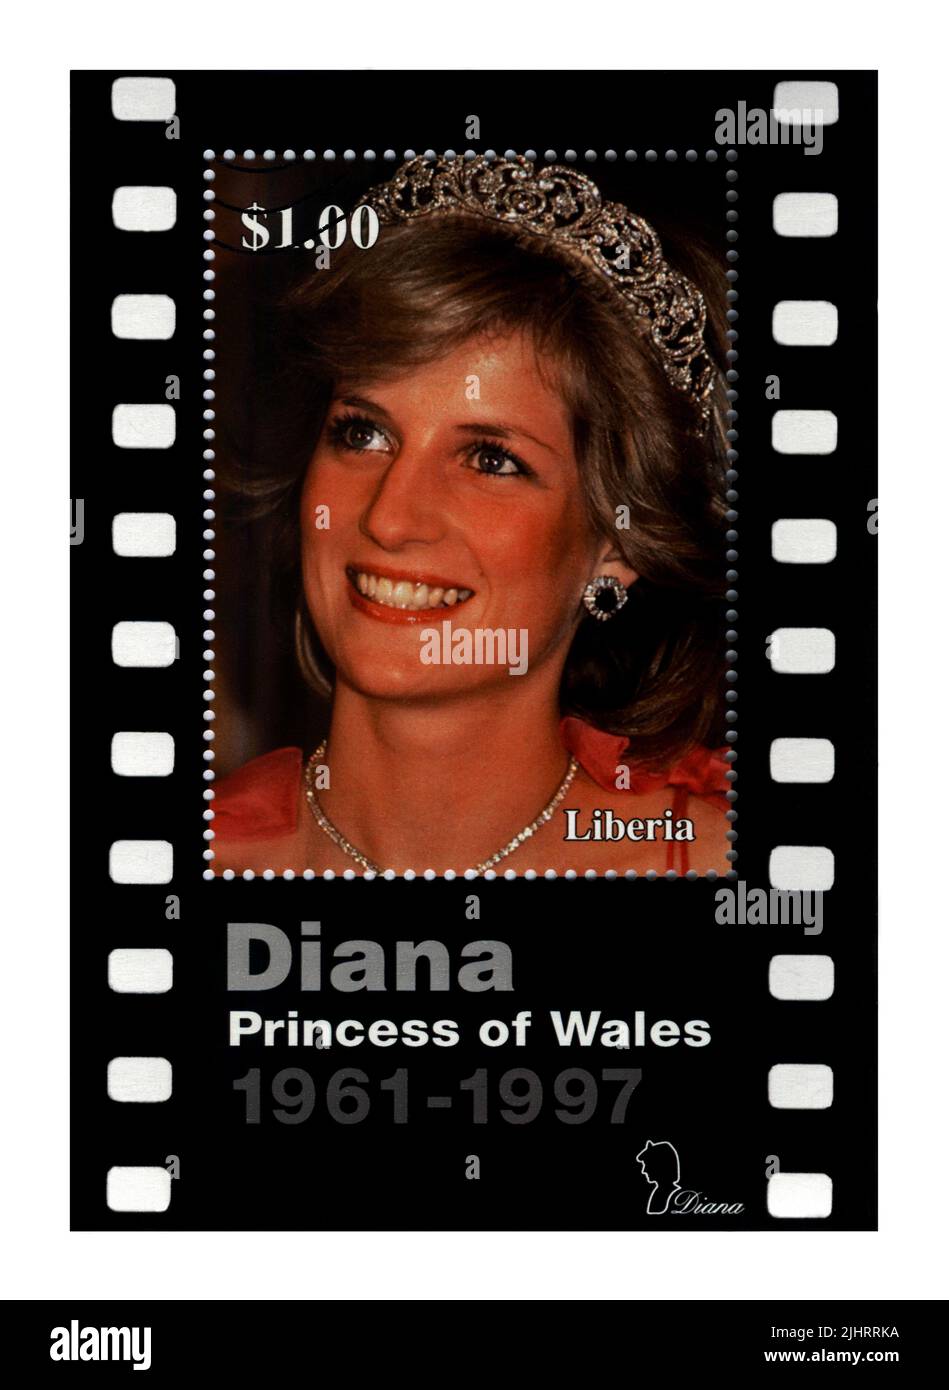 21st Birthday of princess Diana. canceled stamp of LIBERIA dedicated to the memory of Lady Di, Princess of Wales. vintage post stamp isolated Stock Photo